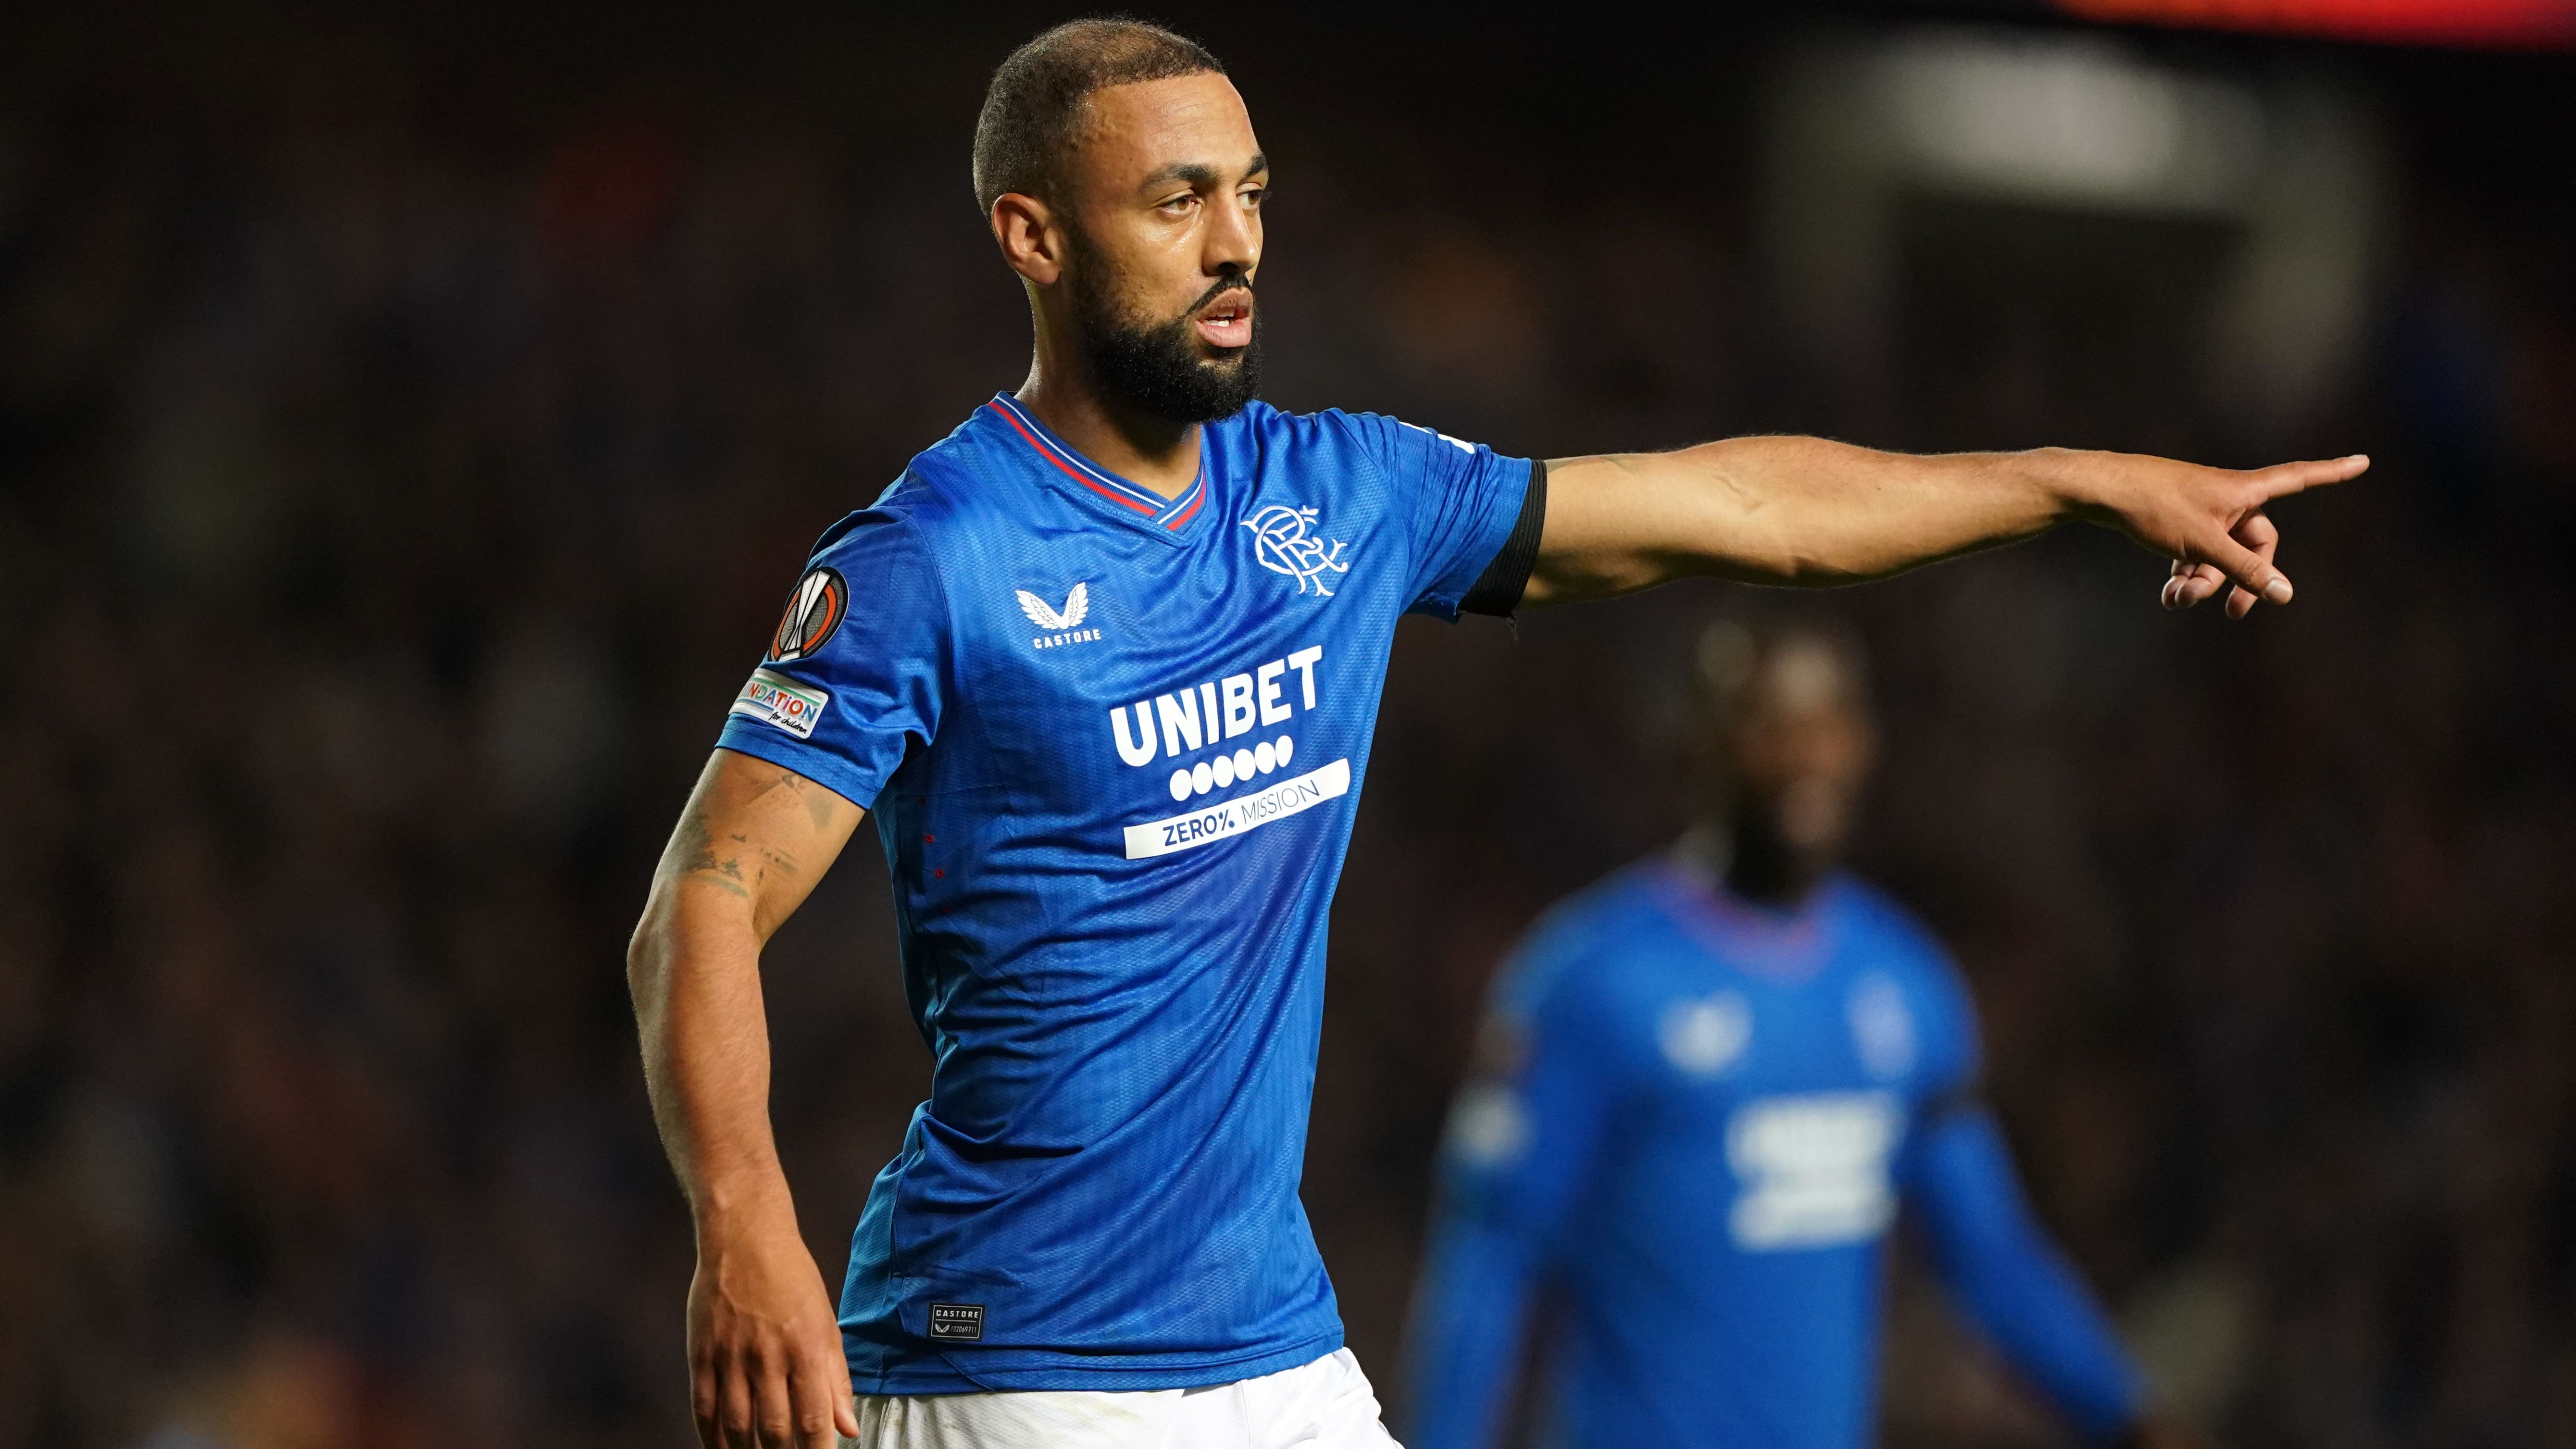 Philippe Clement wants to resolve Kemar Roofe’s injury issues for long-term gain